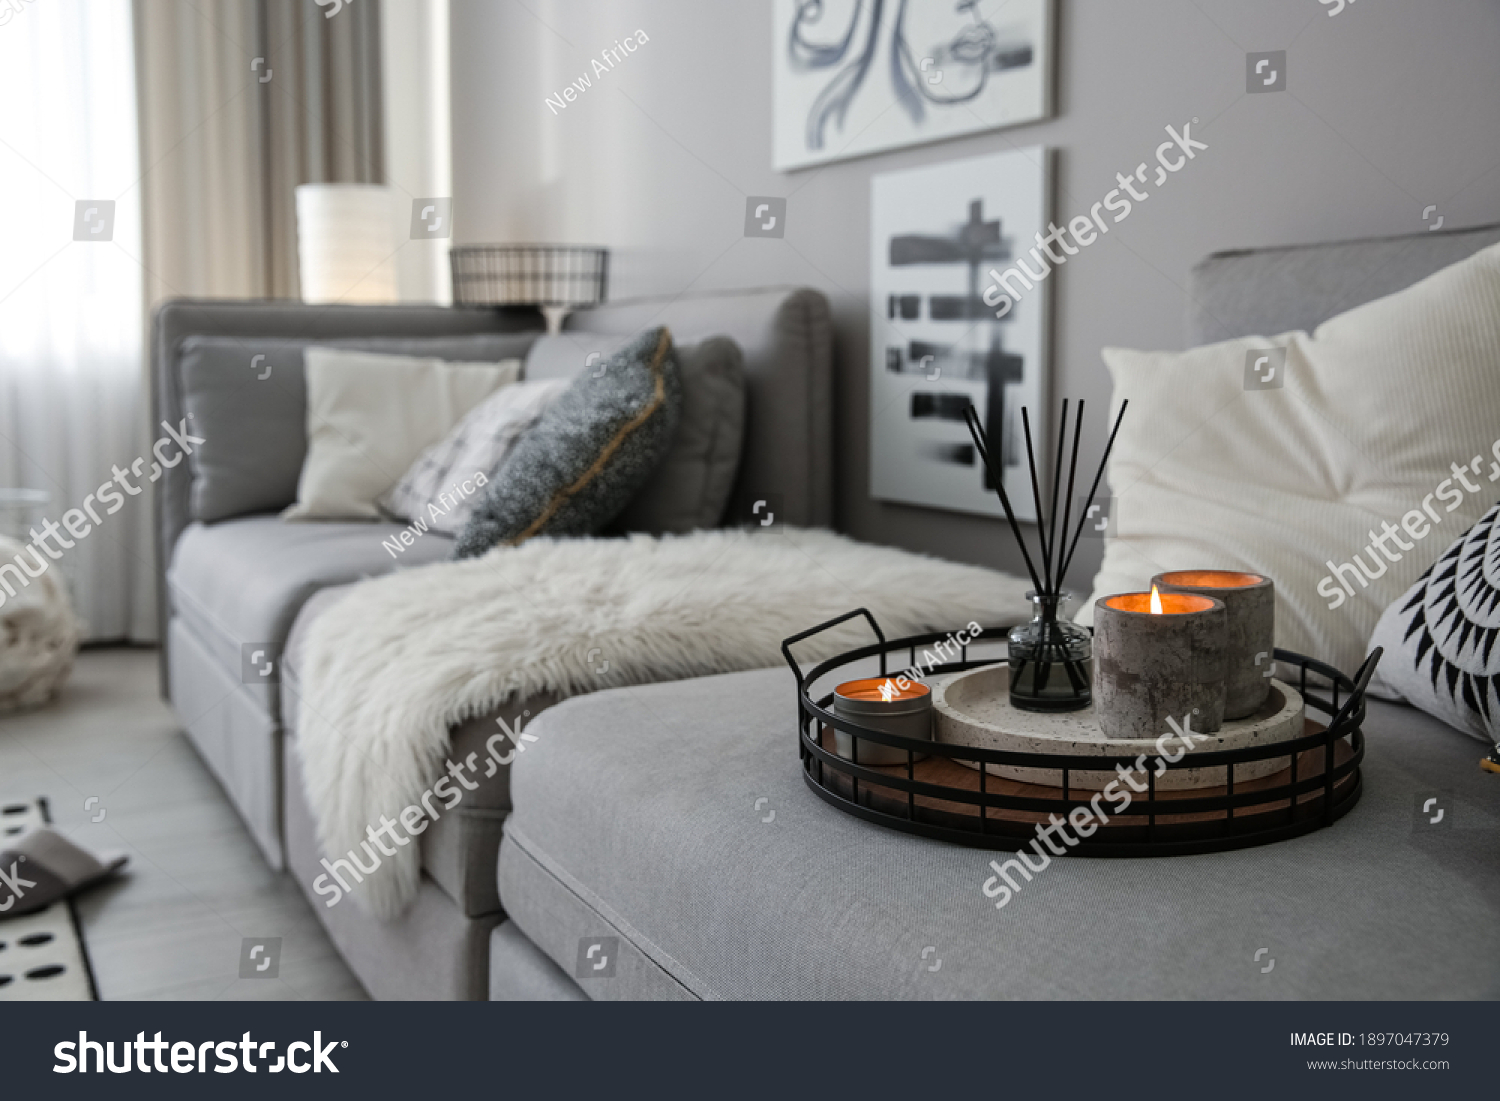 Candles and aroma reed diffuser on grey sofa, space for text #1897047379